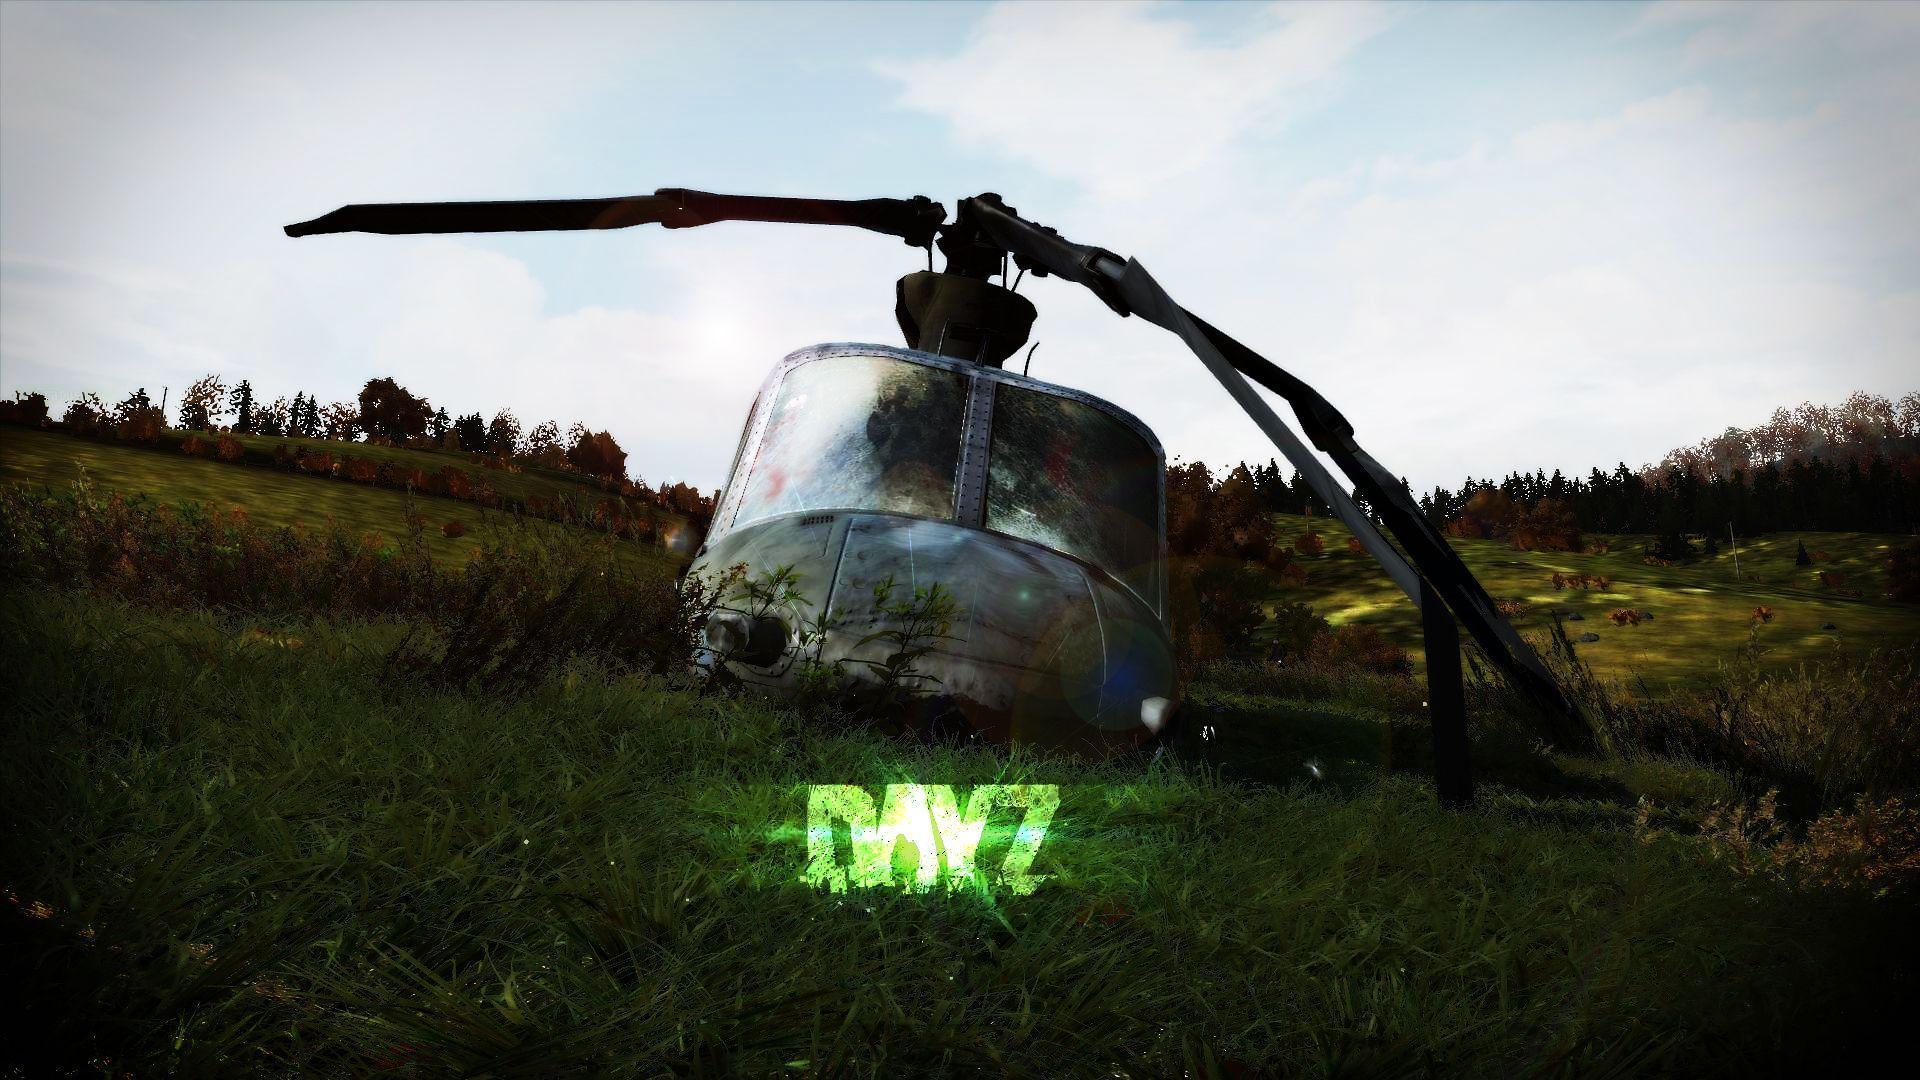 DAYZ Helicopter Game wallpaper